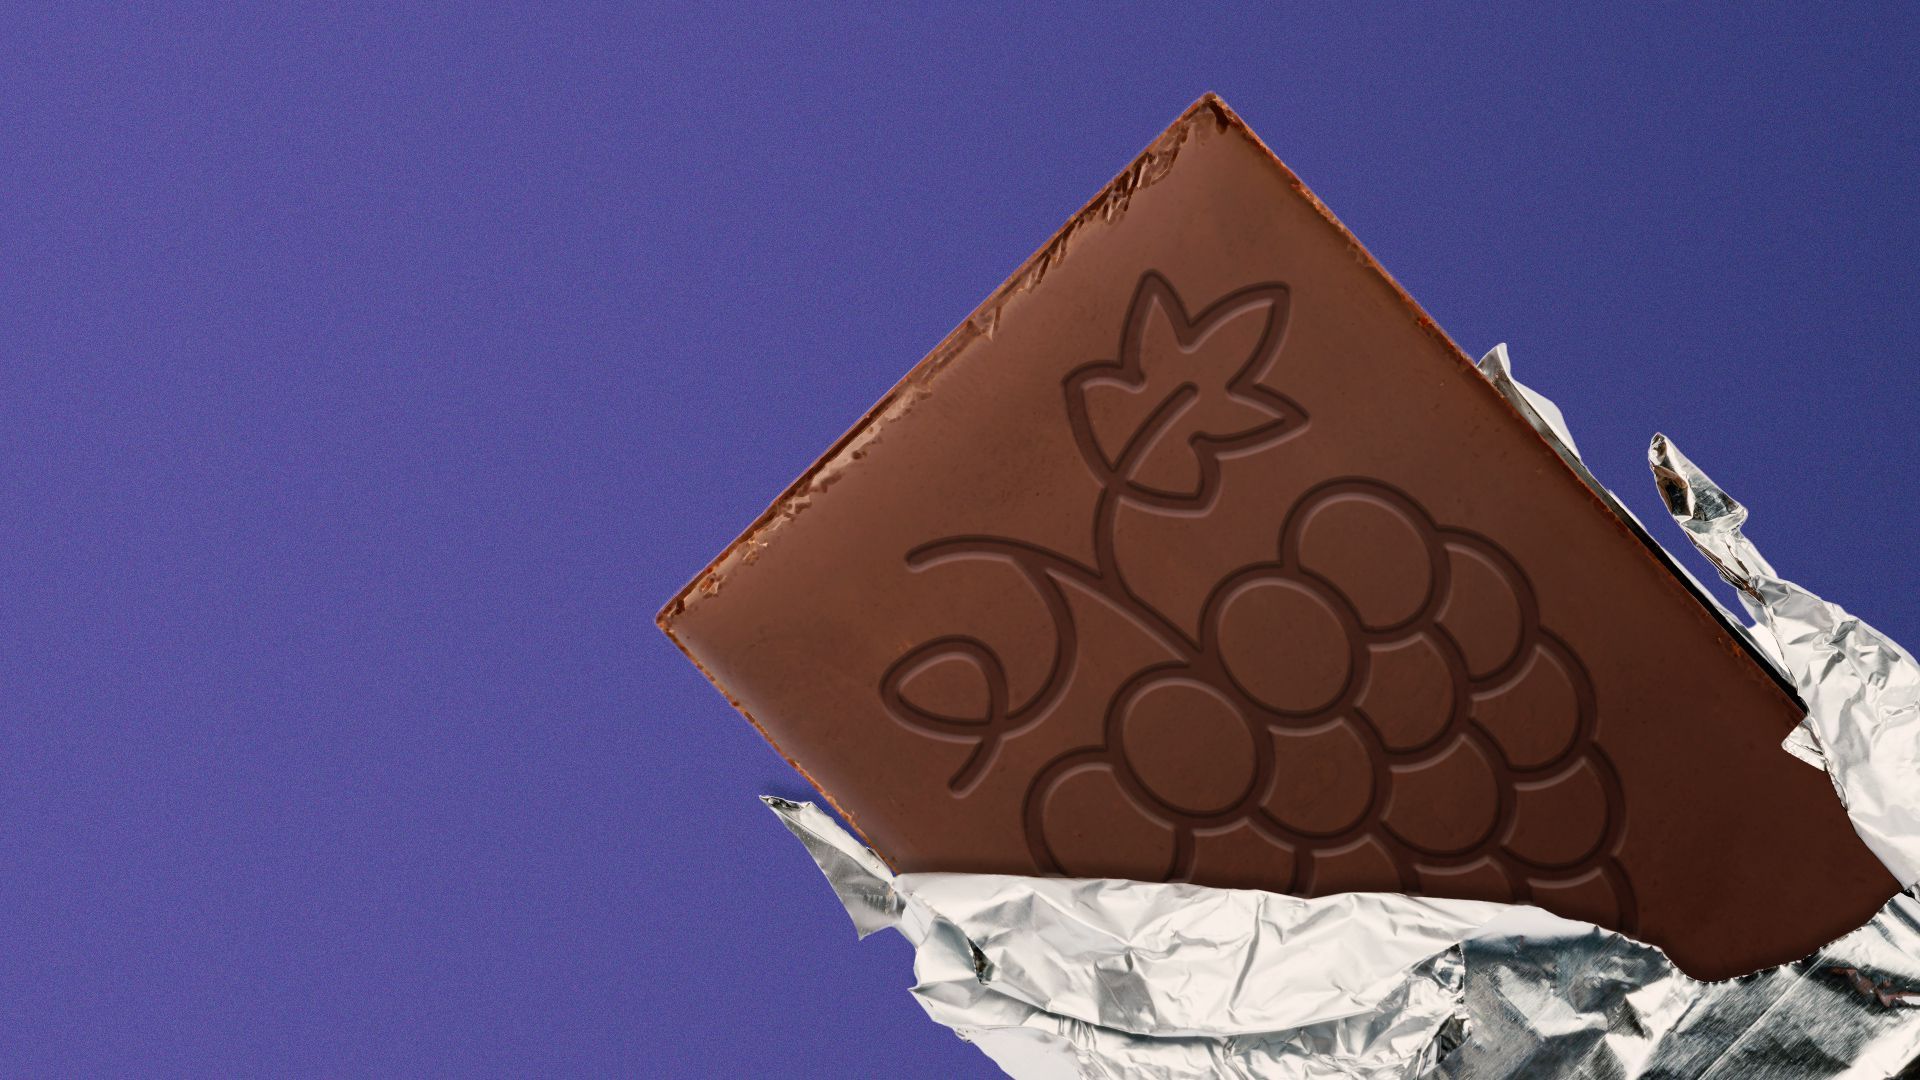 Illustration of a chocolate bar with an image of grapes stamped on it.